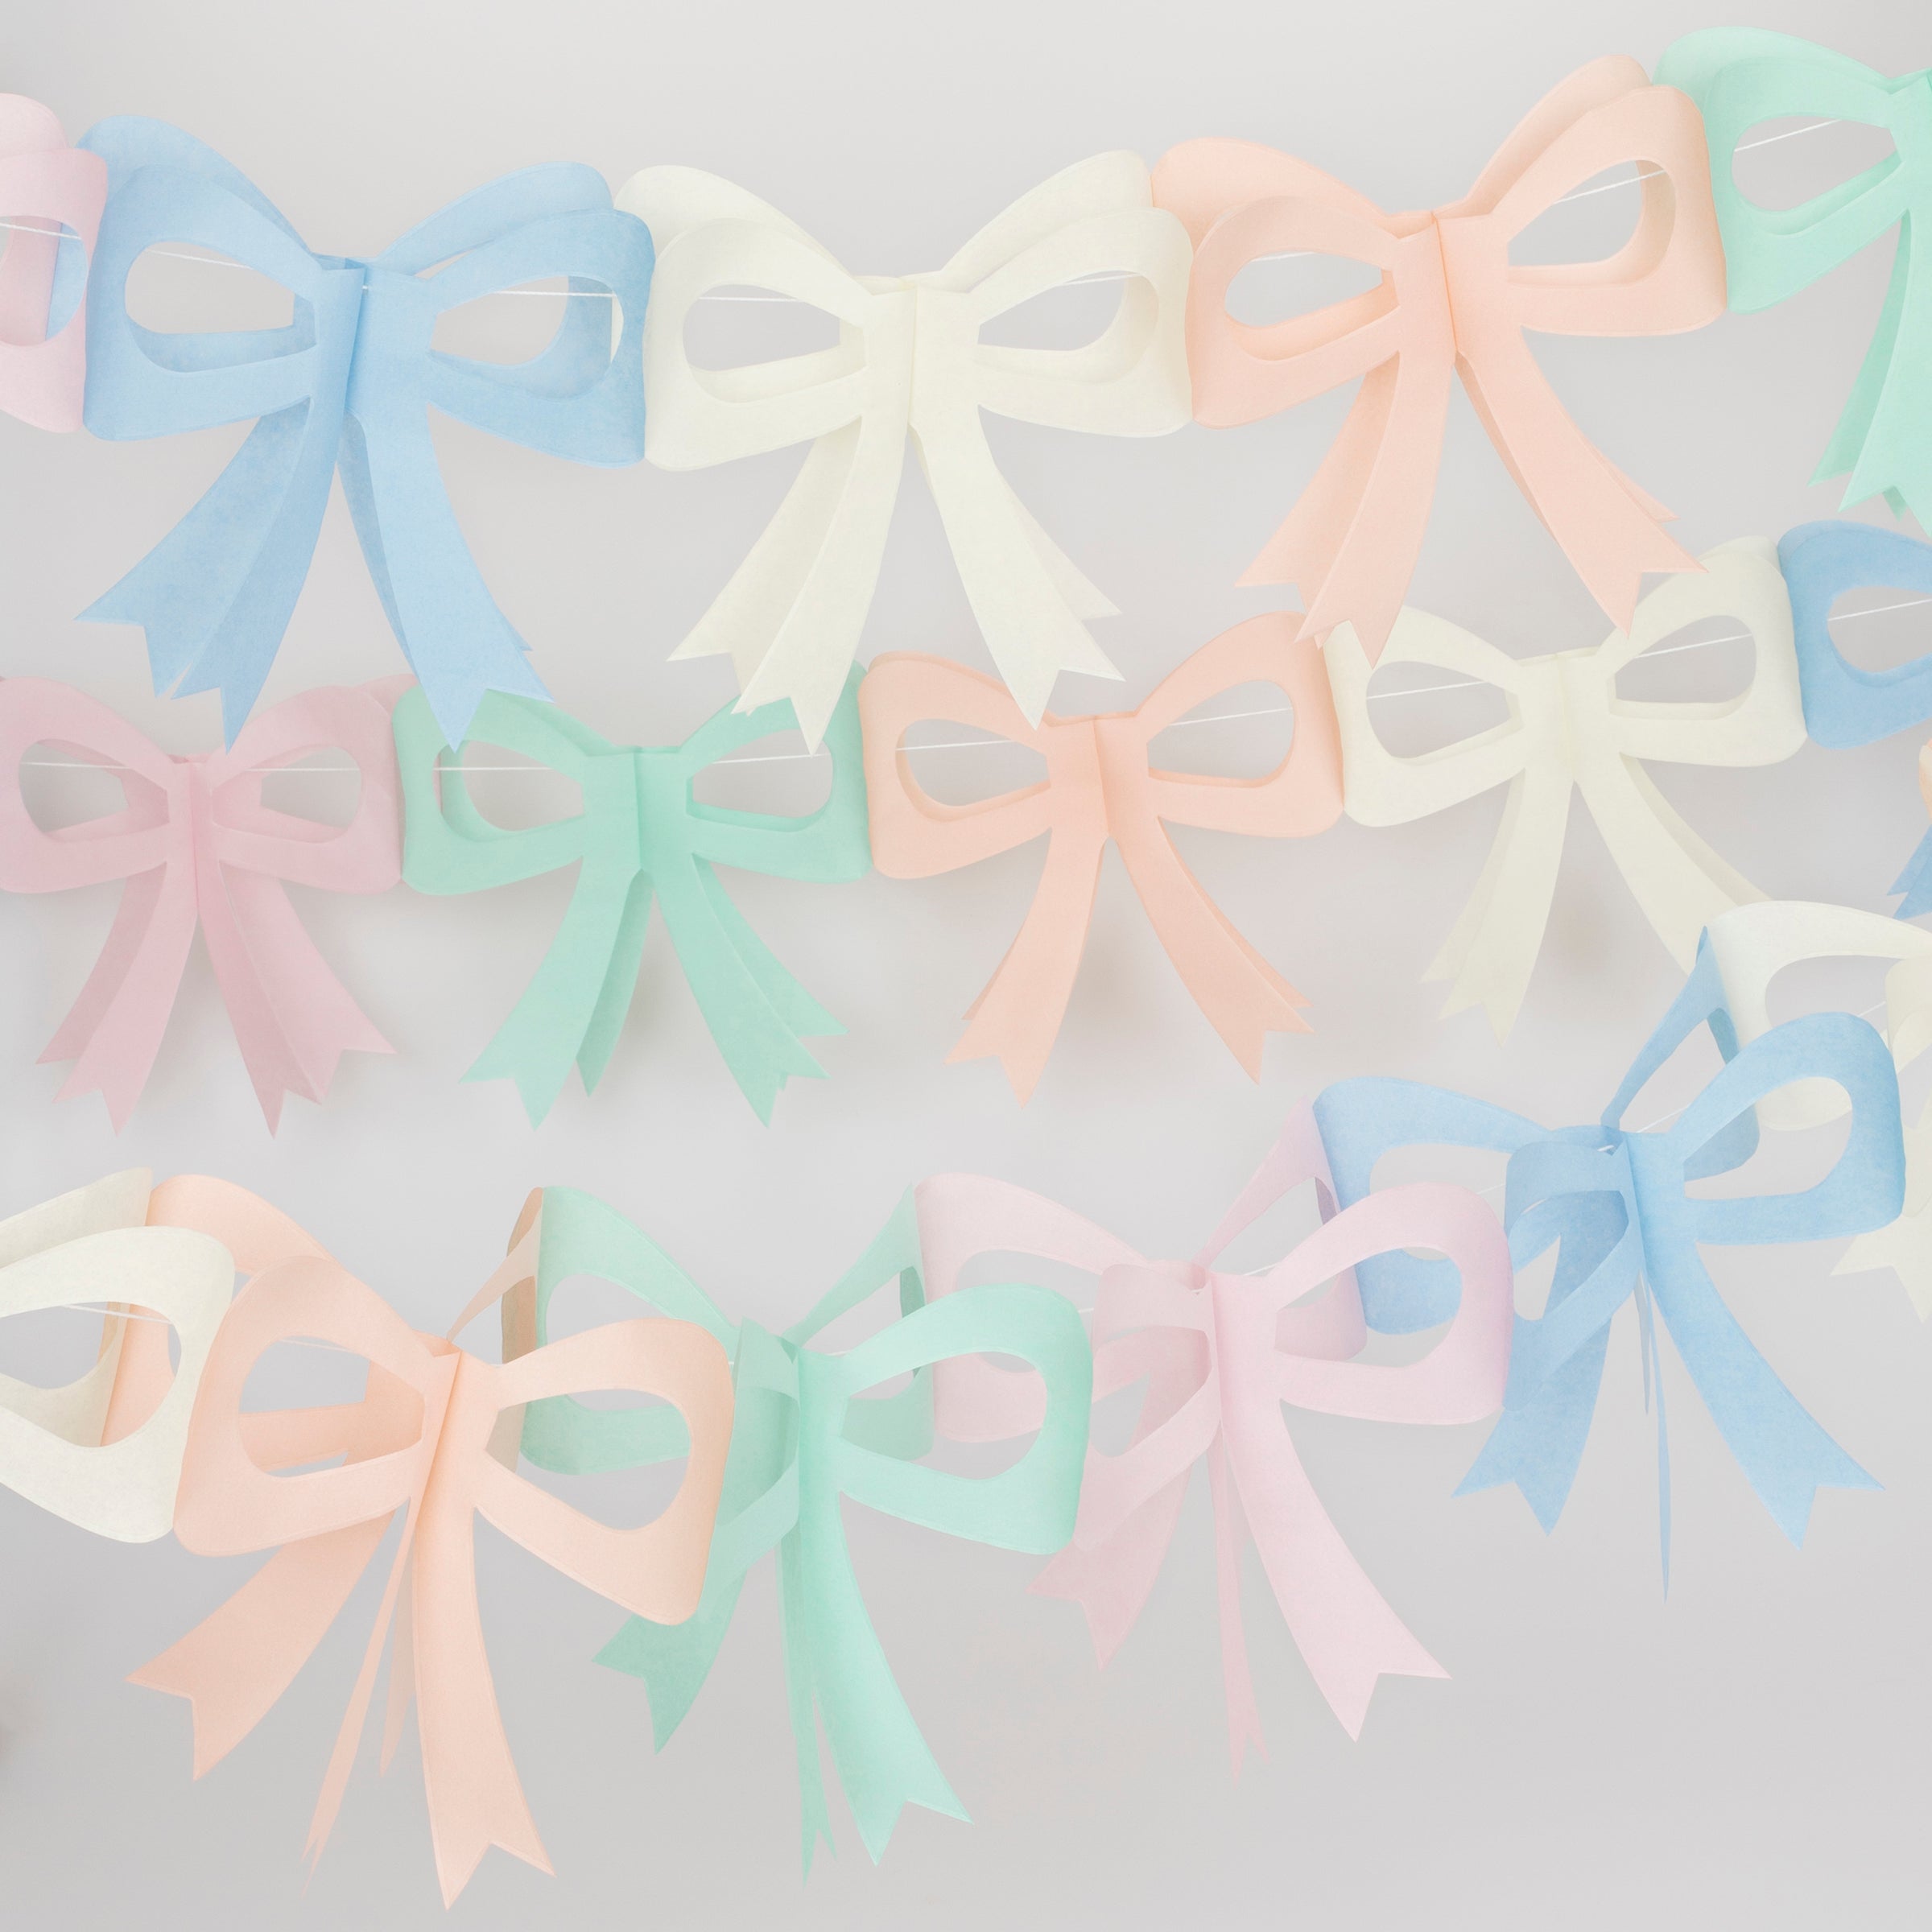 Our pack of 3 party garlands, with colorful bows, is ideal as Easter decorations.